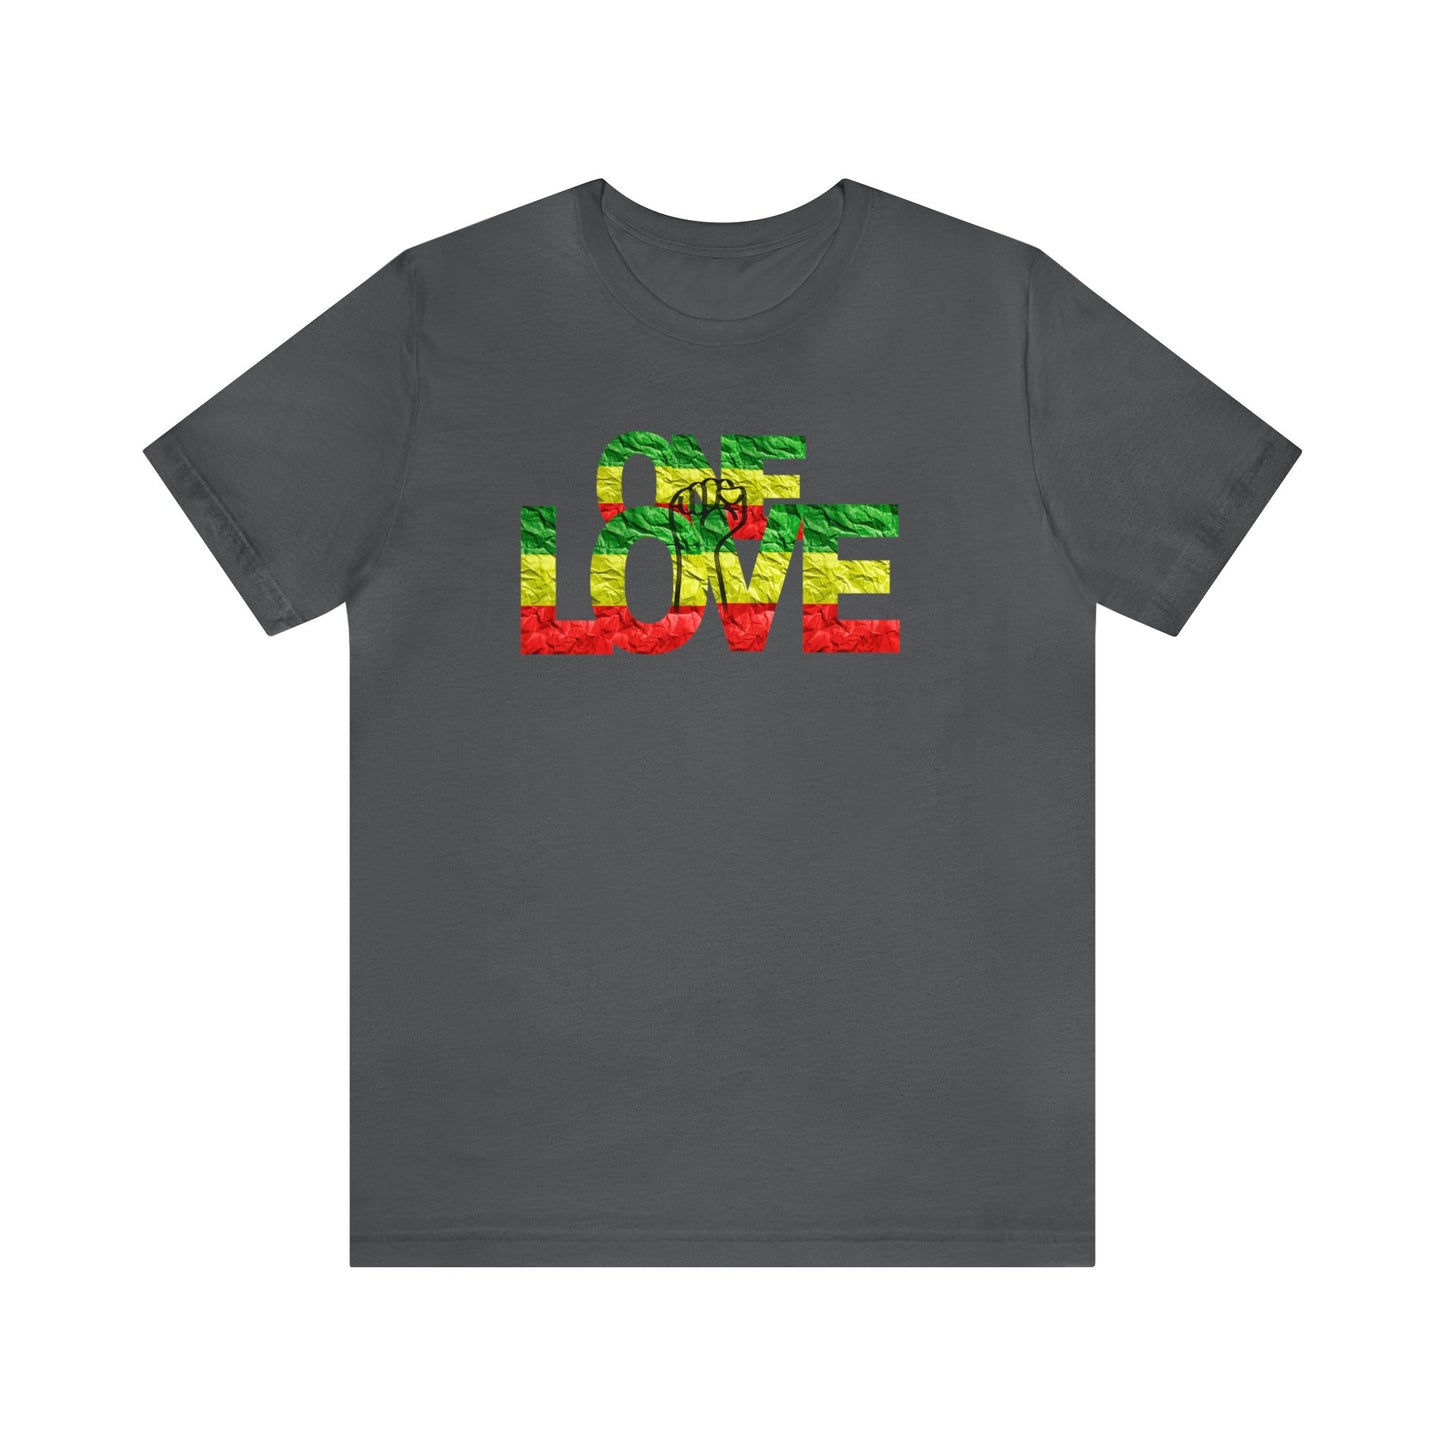 ONE LOVE AND POWER ROOTS COLOR STATEMENT T SHIRT